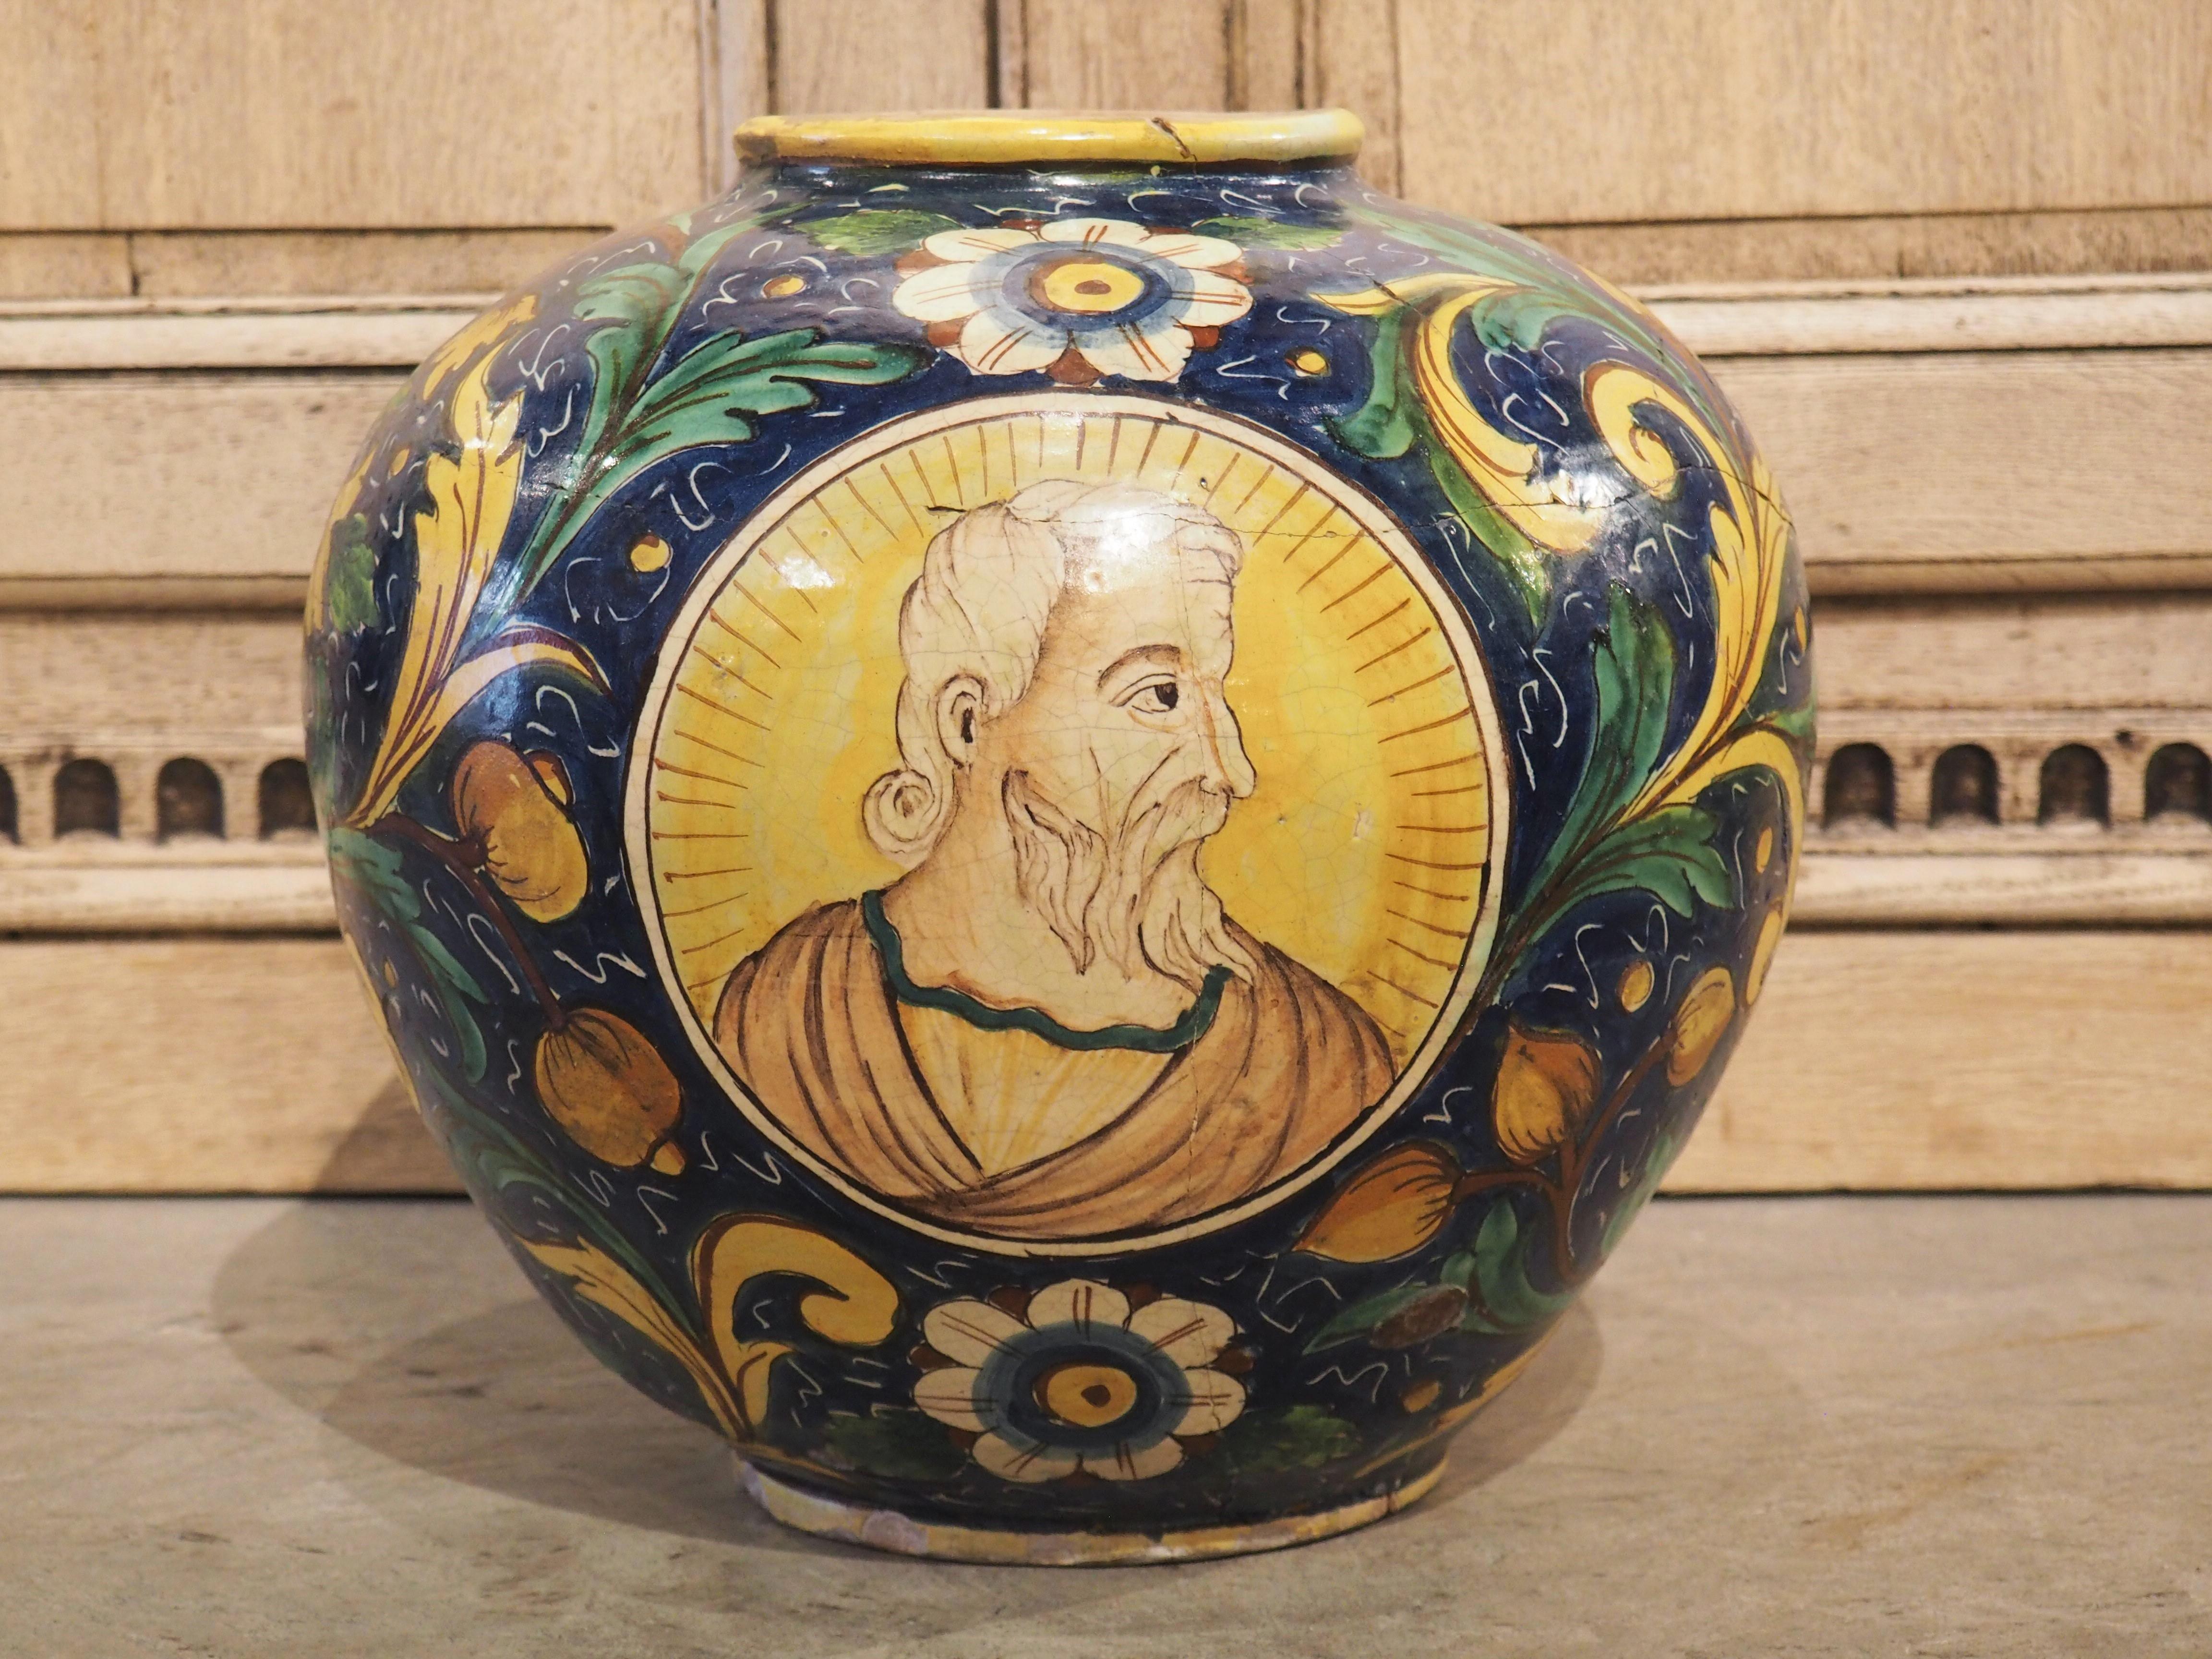 Vivid colors, hand-painted in the Renaissance style, enhance this large maiolica pot from the 1800’s. Maiolica is tin-glazed pottery from Italy that has been decorated over a white background. This pot is considered an istoriato, which is to say